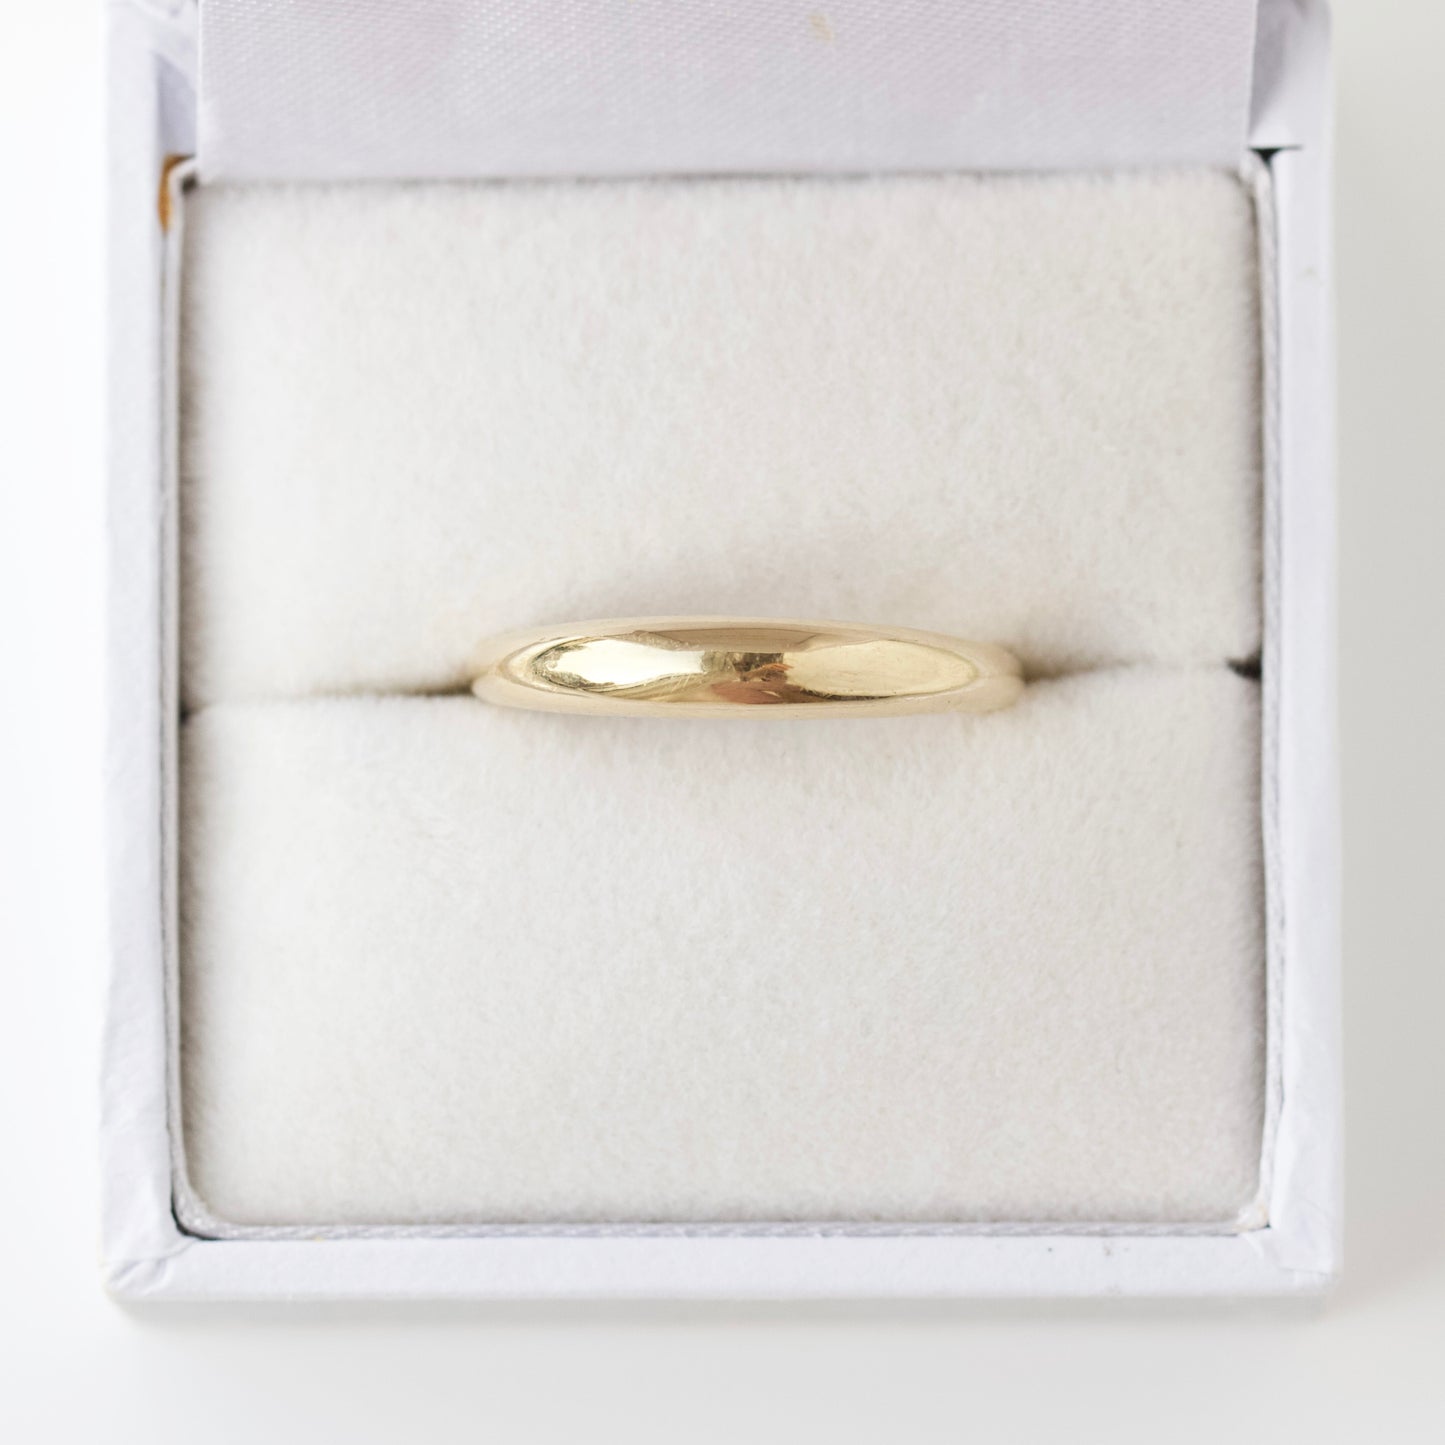 SAMPLE SALE- Dome Ring in 14k Solid Yellow Gold- Size UK O